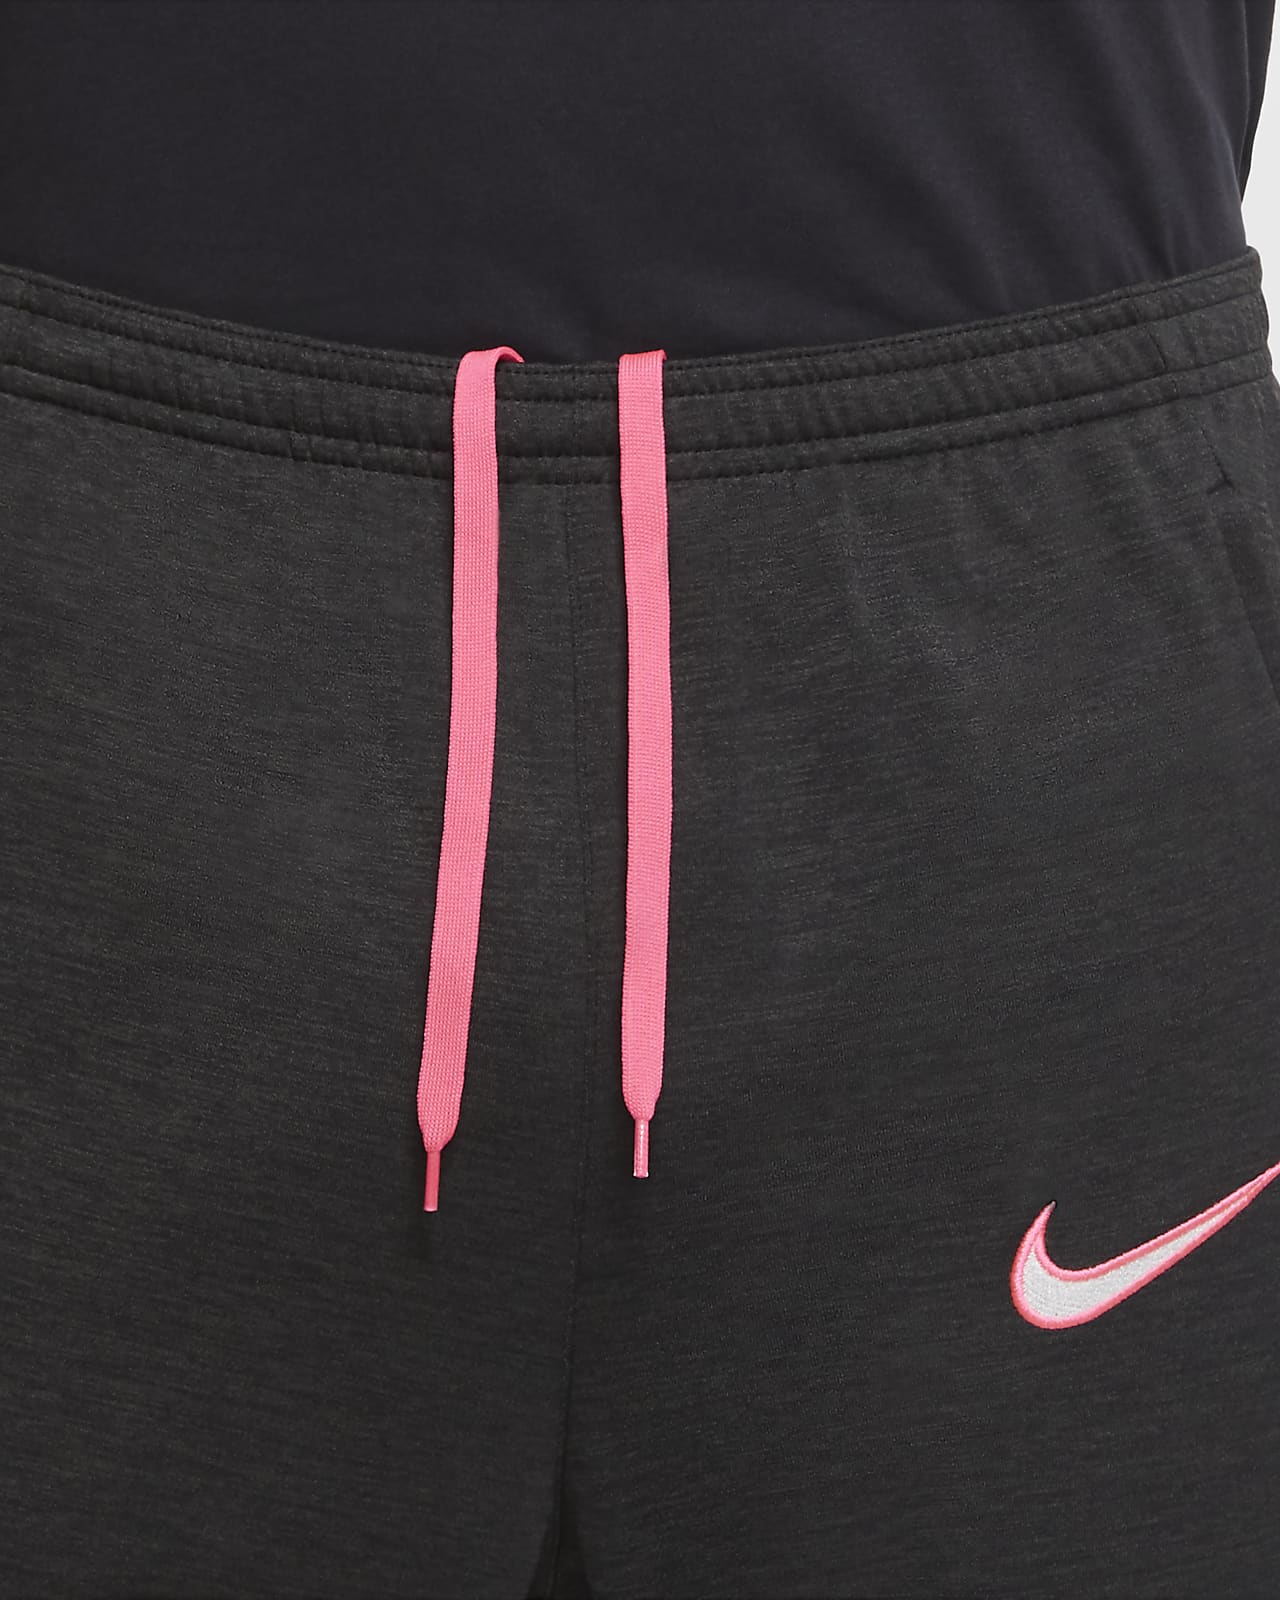 black and pink nike tracksuit